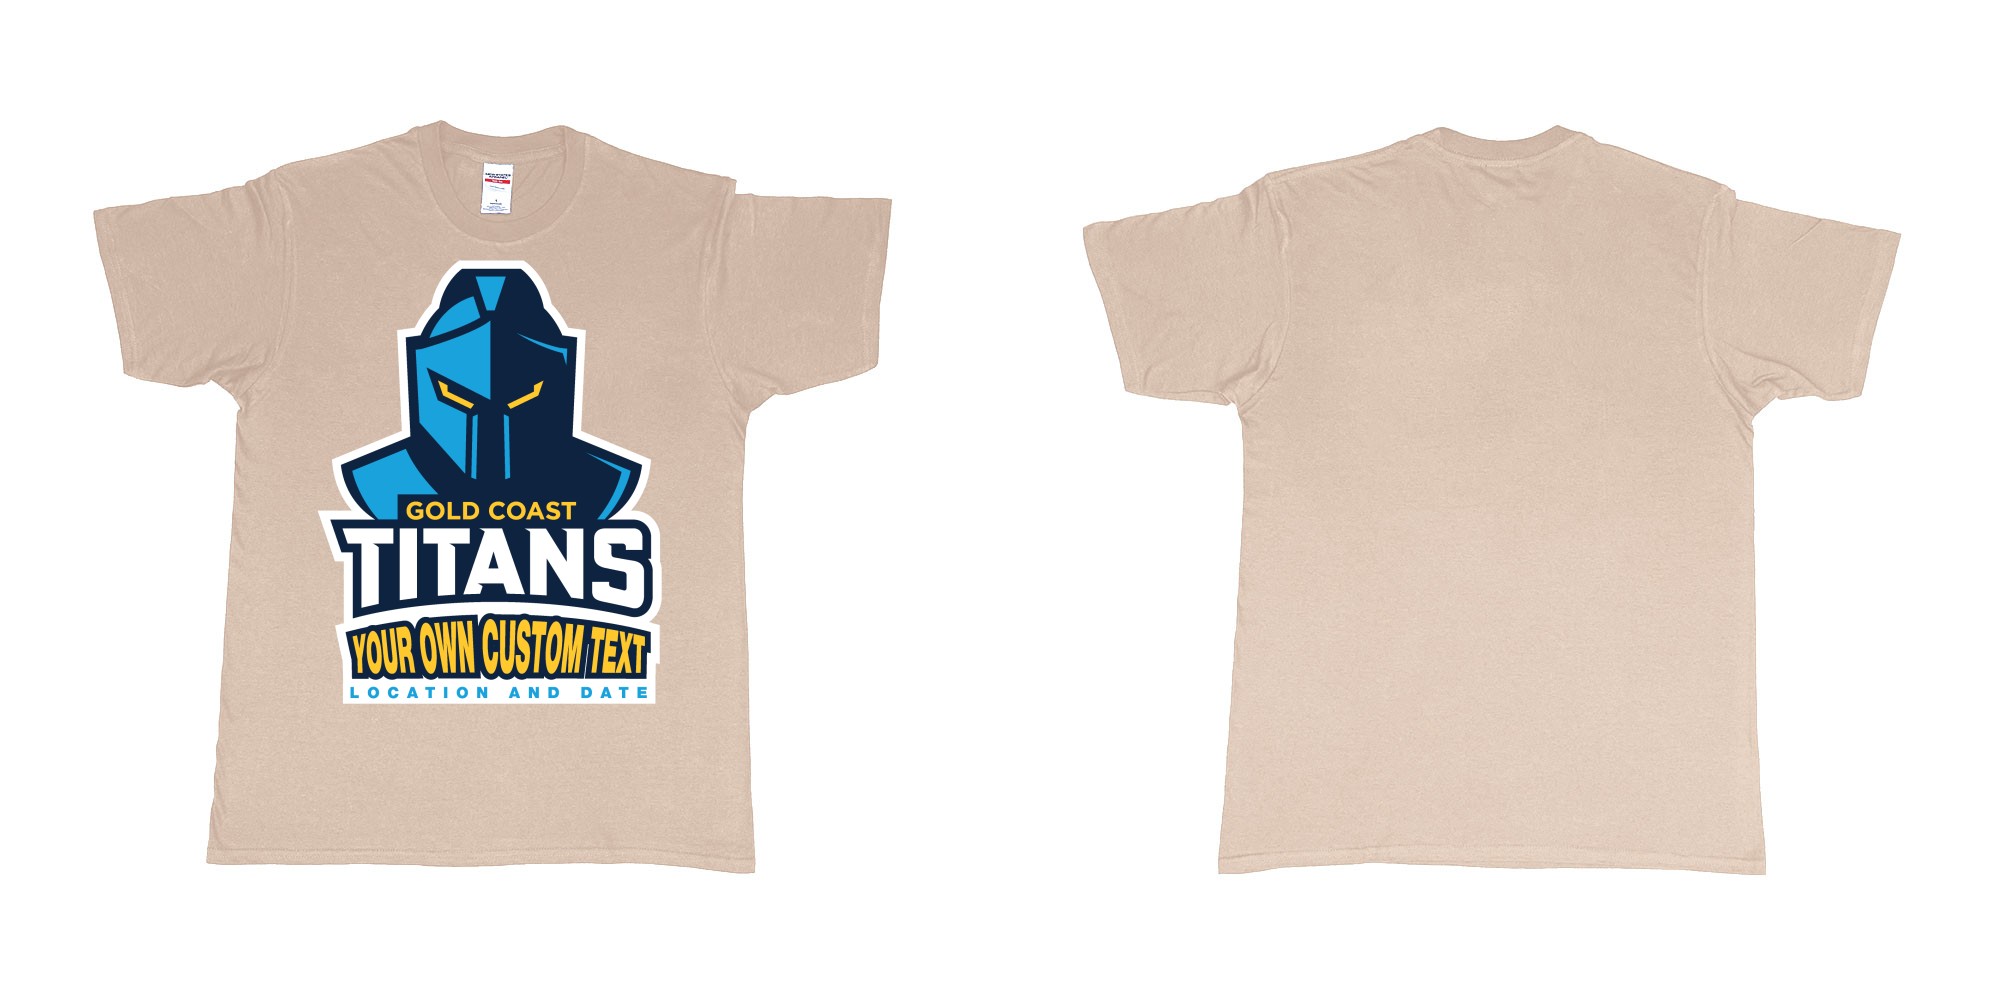 Custom tshirt design gold coast titans own custom design print in fabric color sand choice your own text made in Bali by The Pirate Way